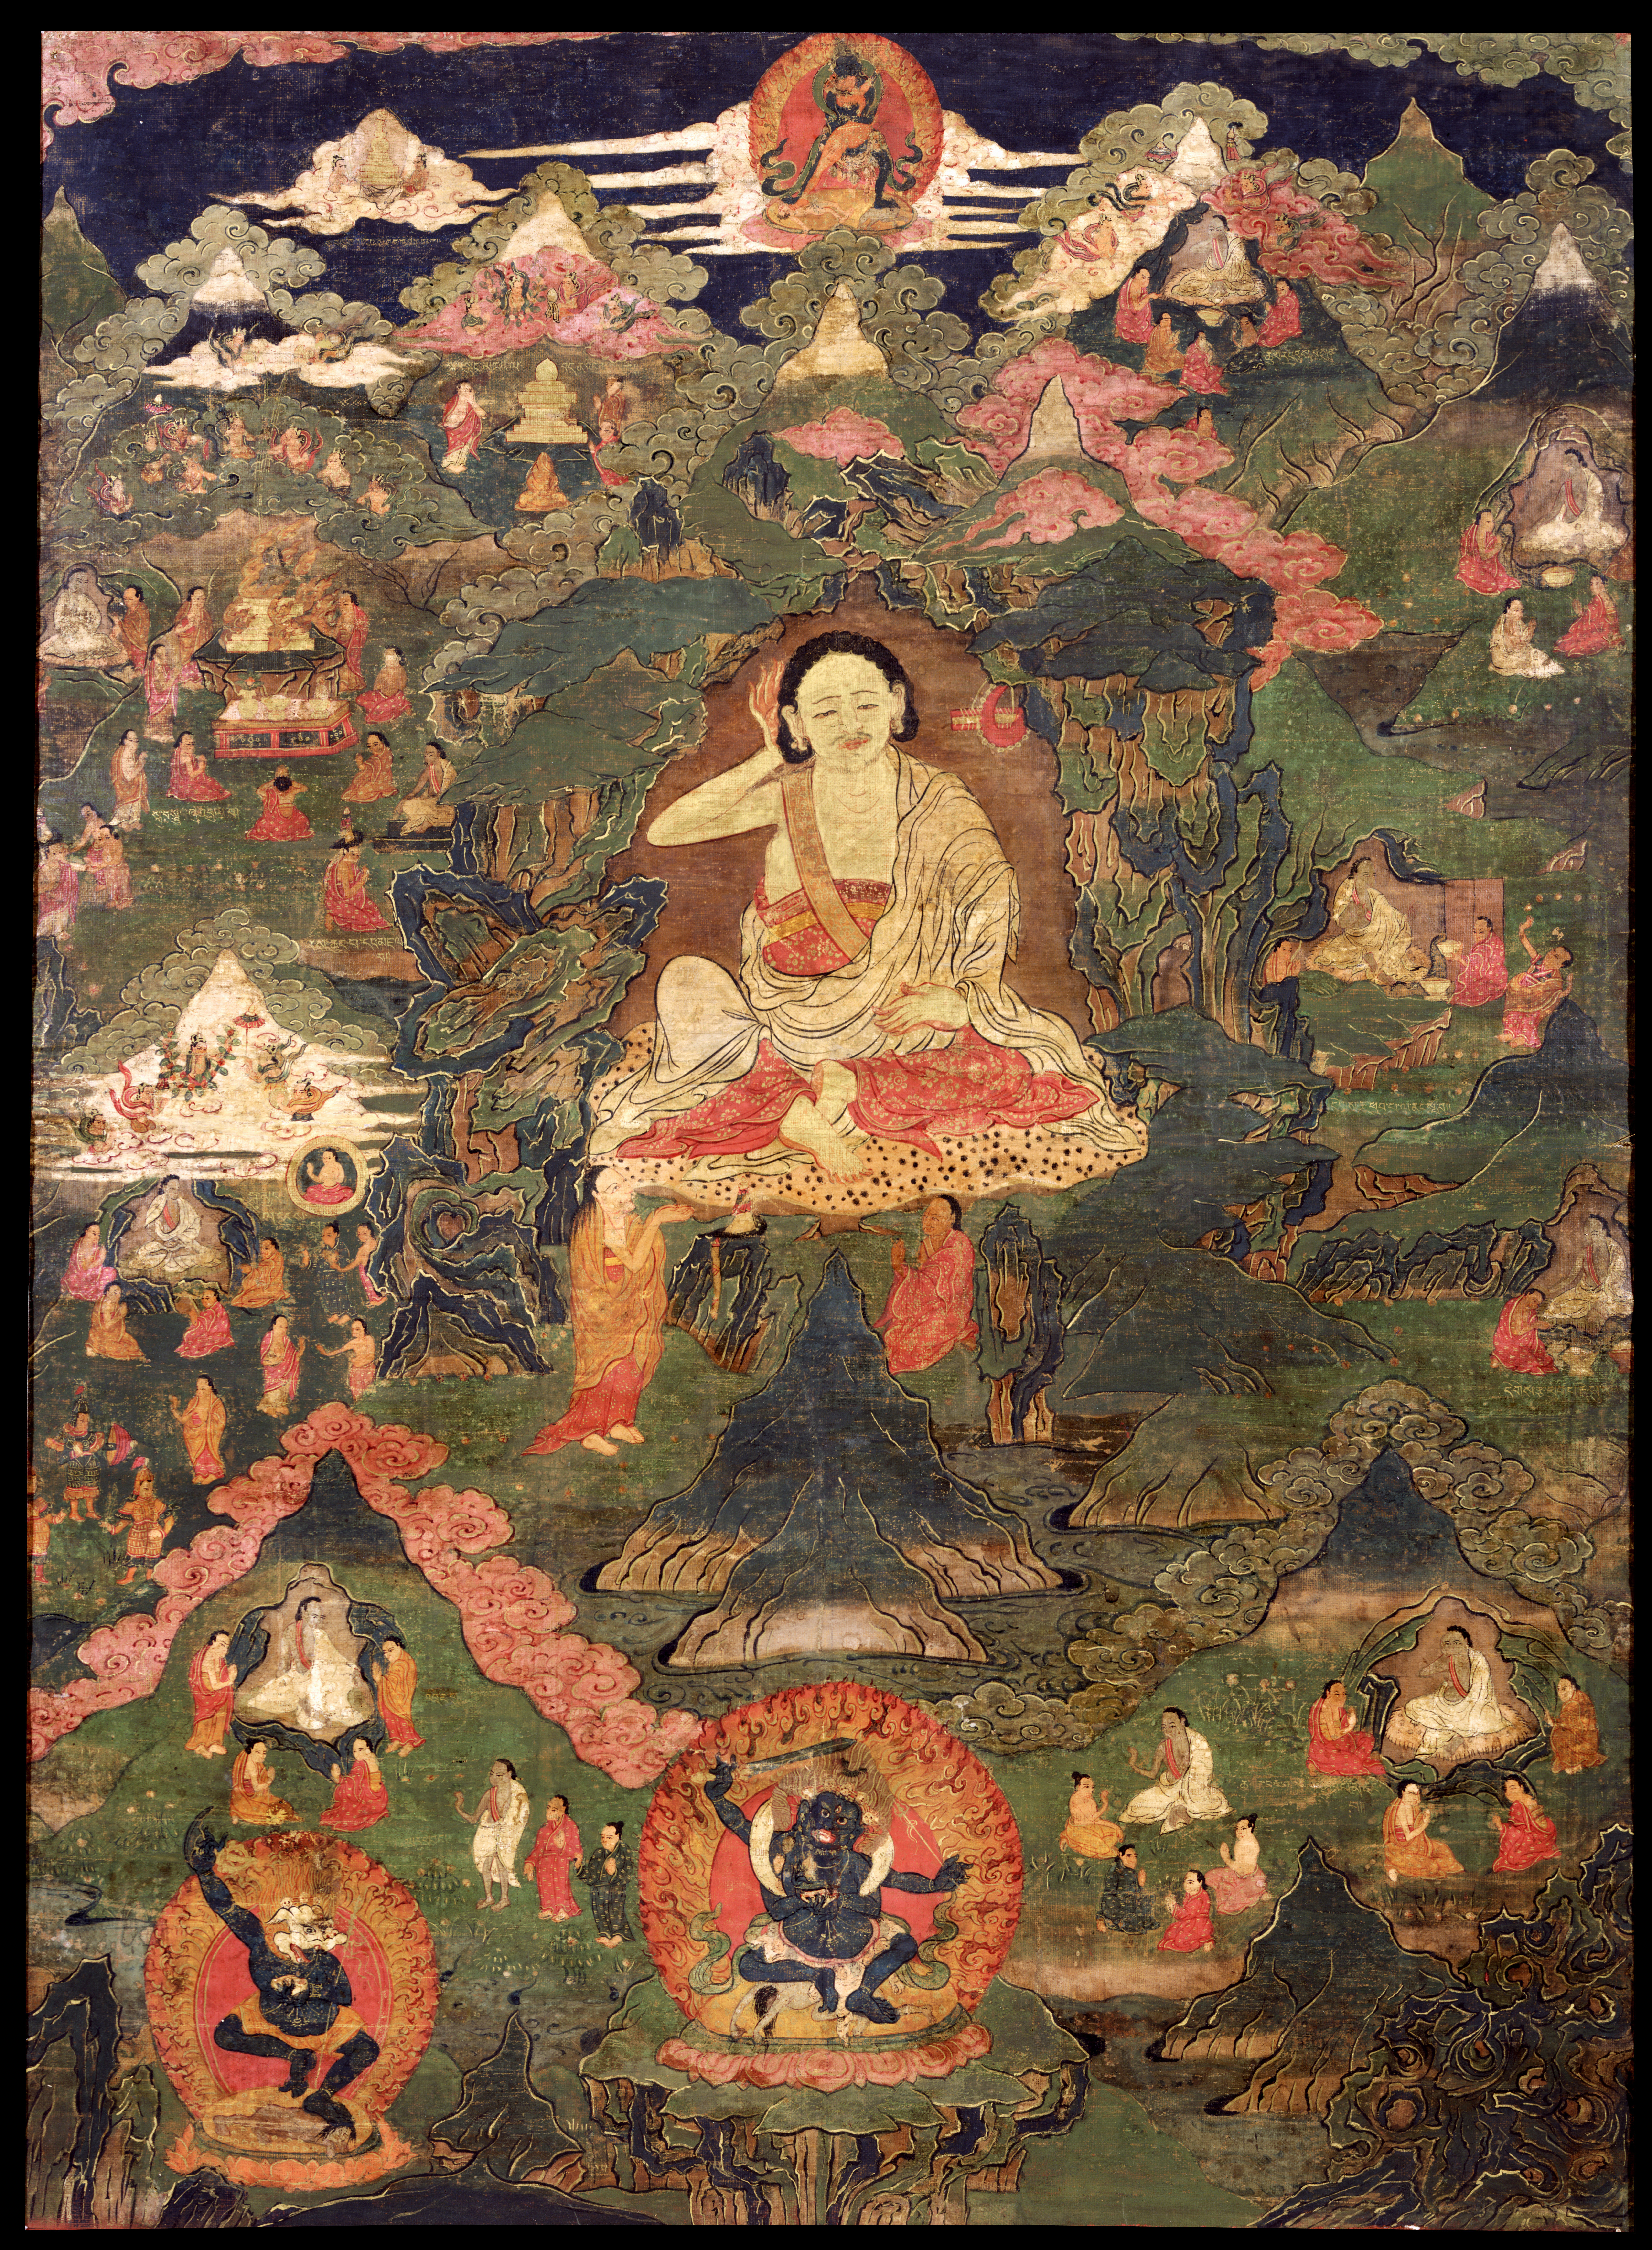 Siddha holds left hand to back of head as he floats above rocky landscape dotted with buildings and groups of figures